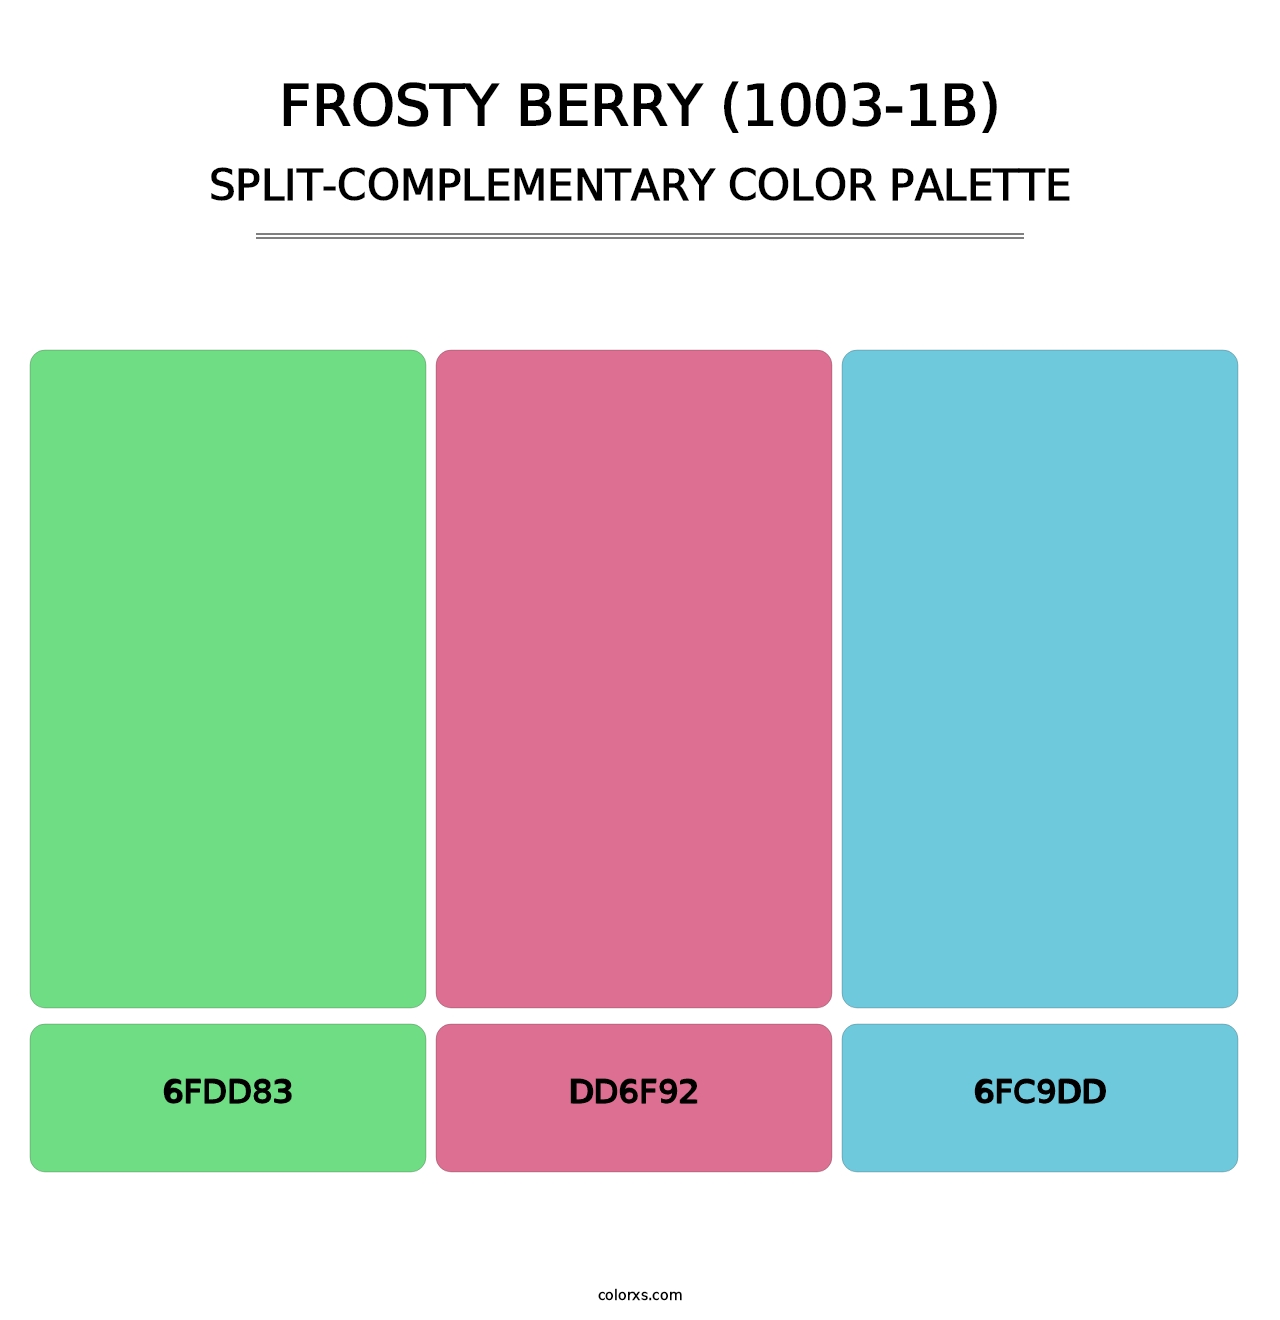 Frosty Berry (1003-1B) - Split-Complementary Color Palette